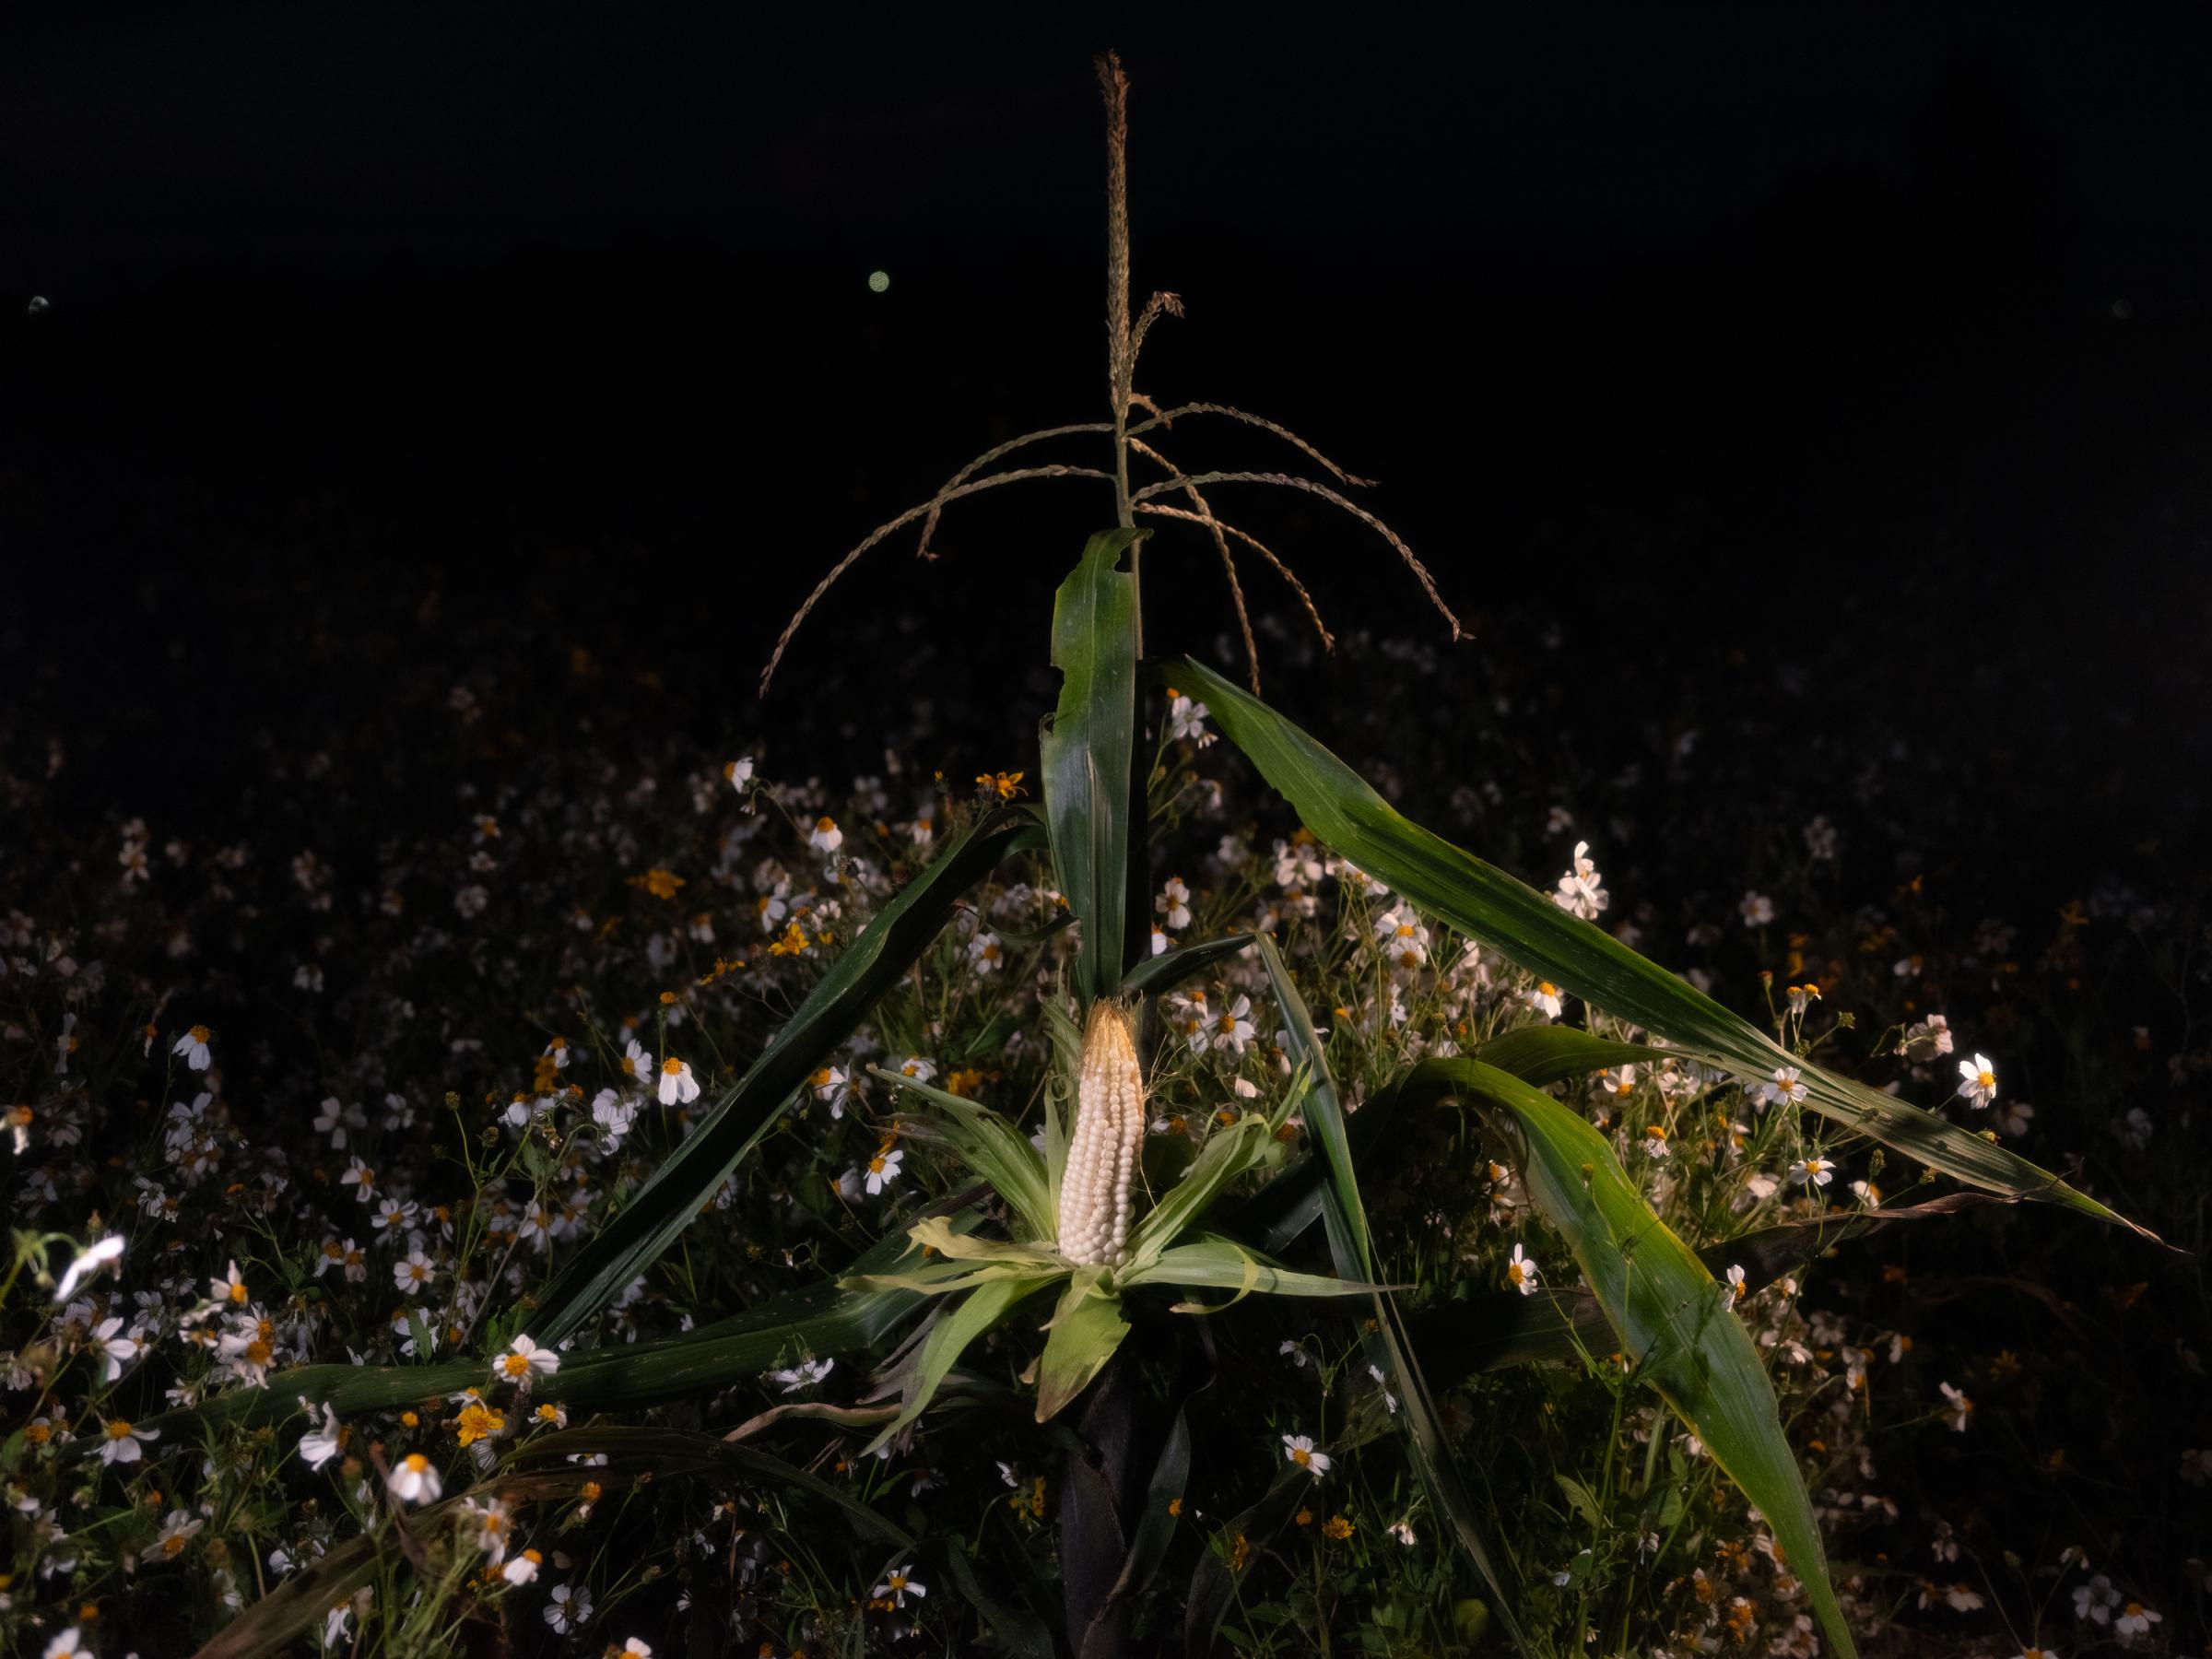 Returning to the Land - Ixtenco, Tlaxcala, Mexico 2023. A corn plant with a ripe...